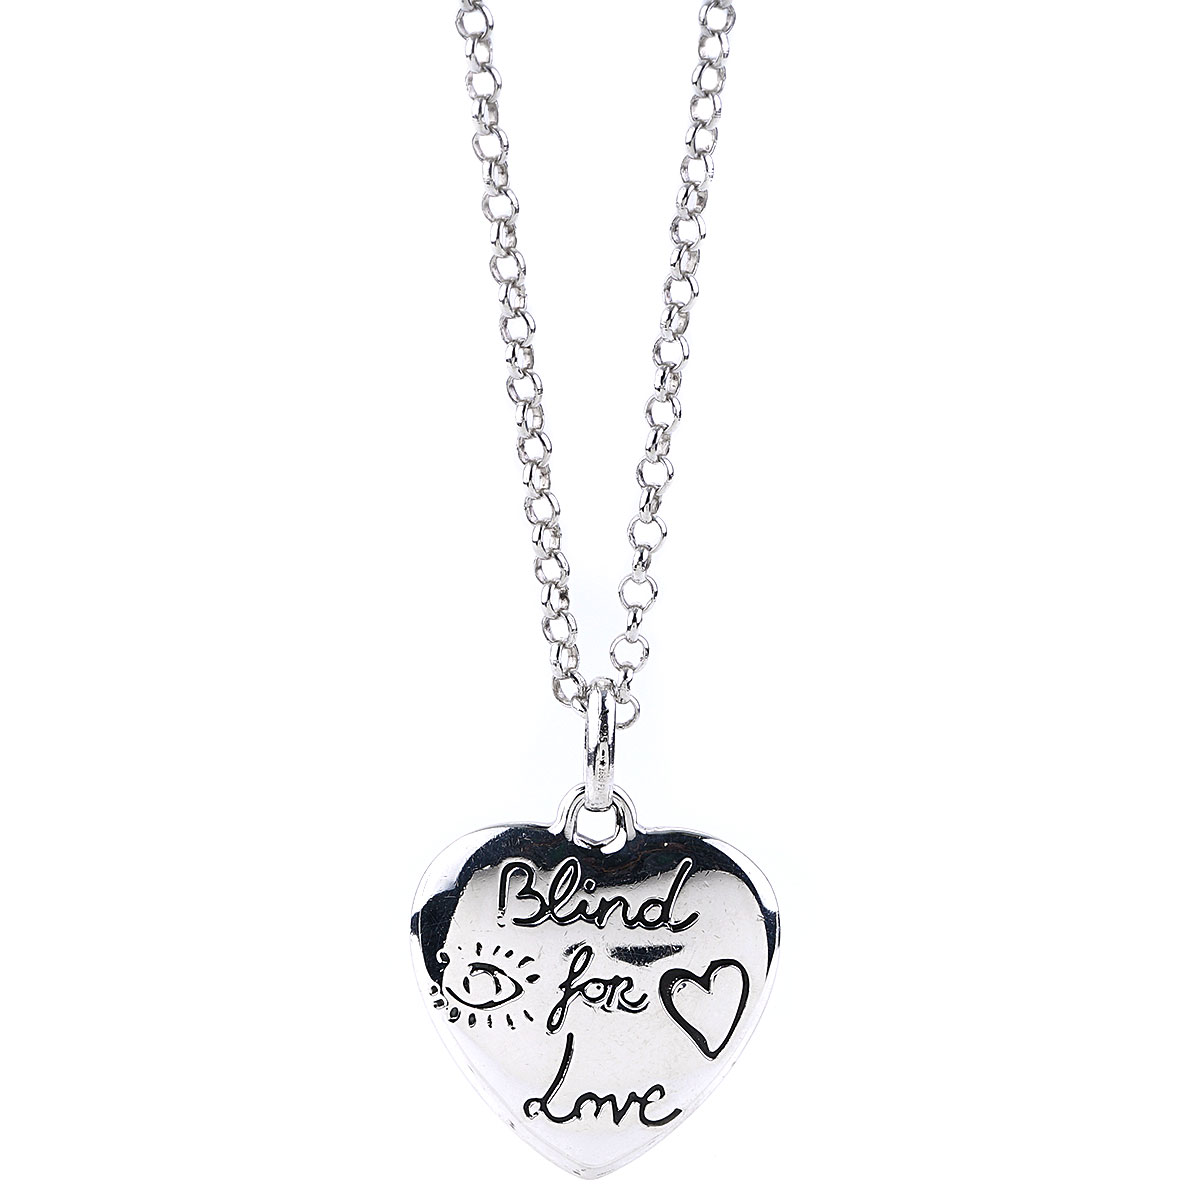 Gucci Engraved Heart Trademark Necklace | Neiman Marcus